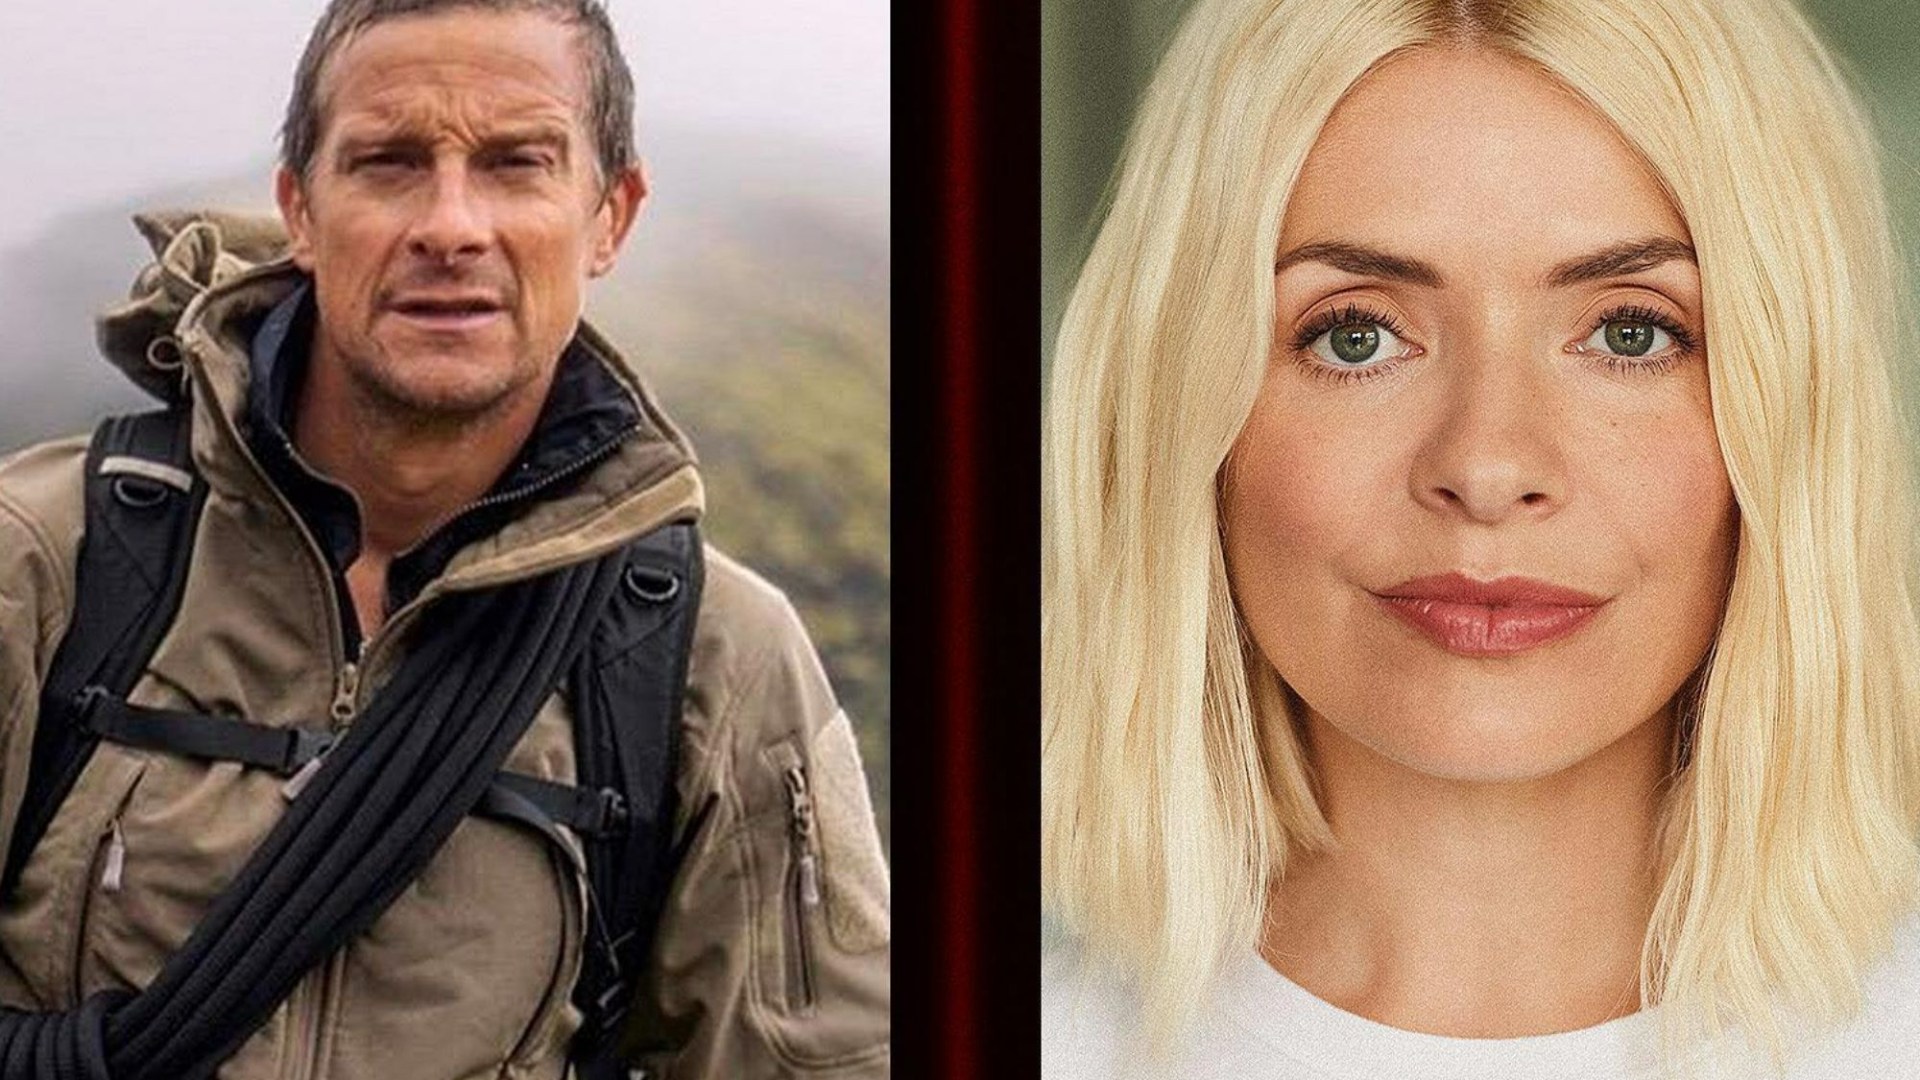 “Uncover the Fiery Feud Between Bear Grylls and Holly Willoughby on New Netflix Show” #BearGrylls #HollyWilloughby #Netflix #celebfeud #awkwardhistory